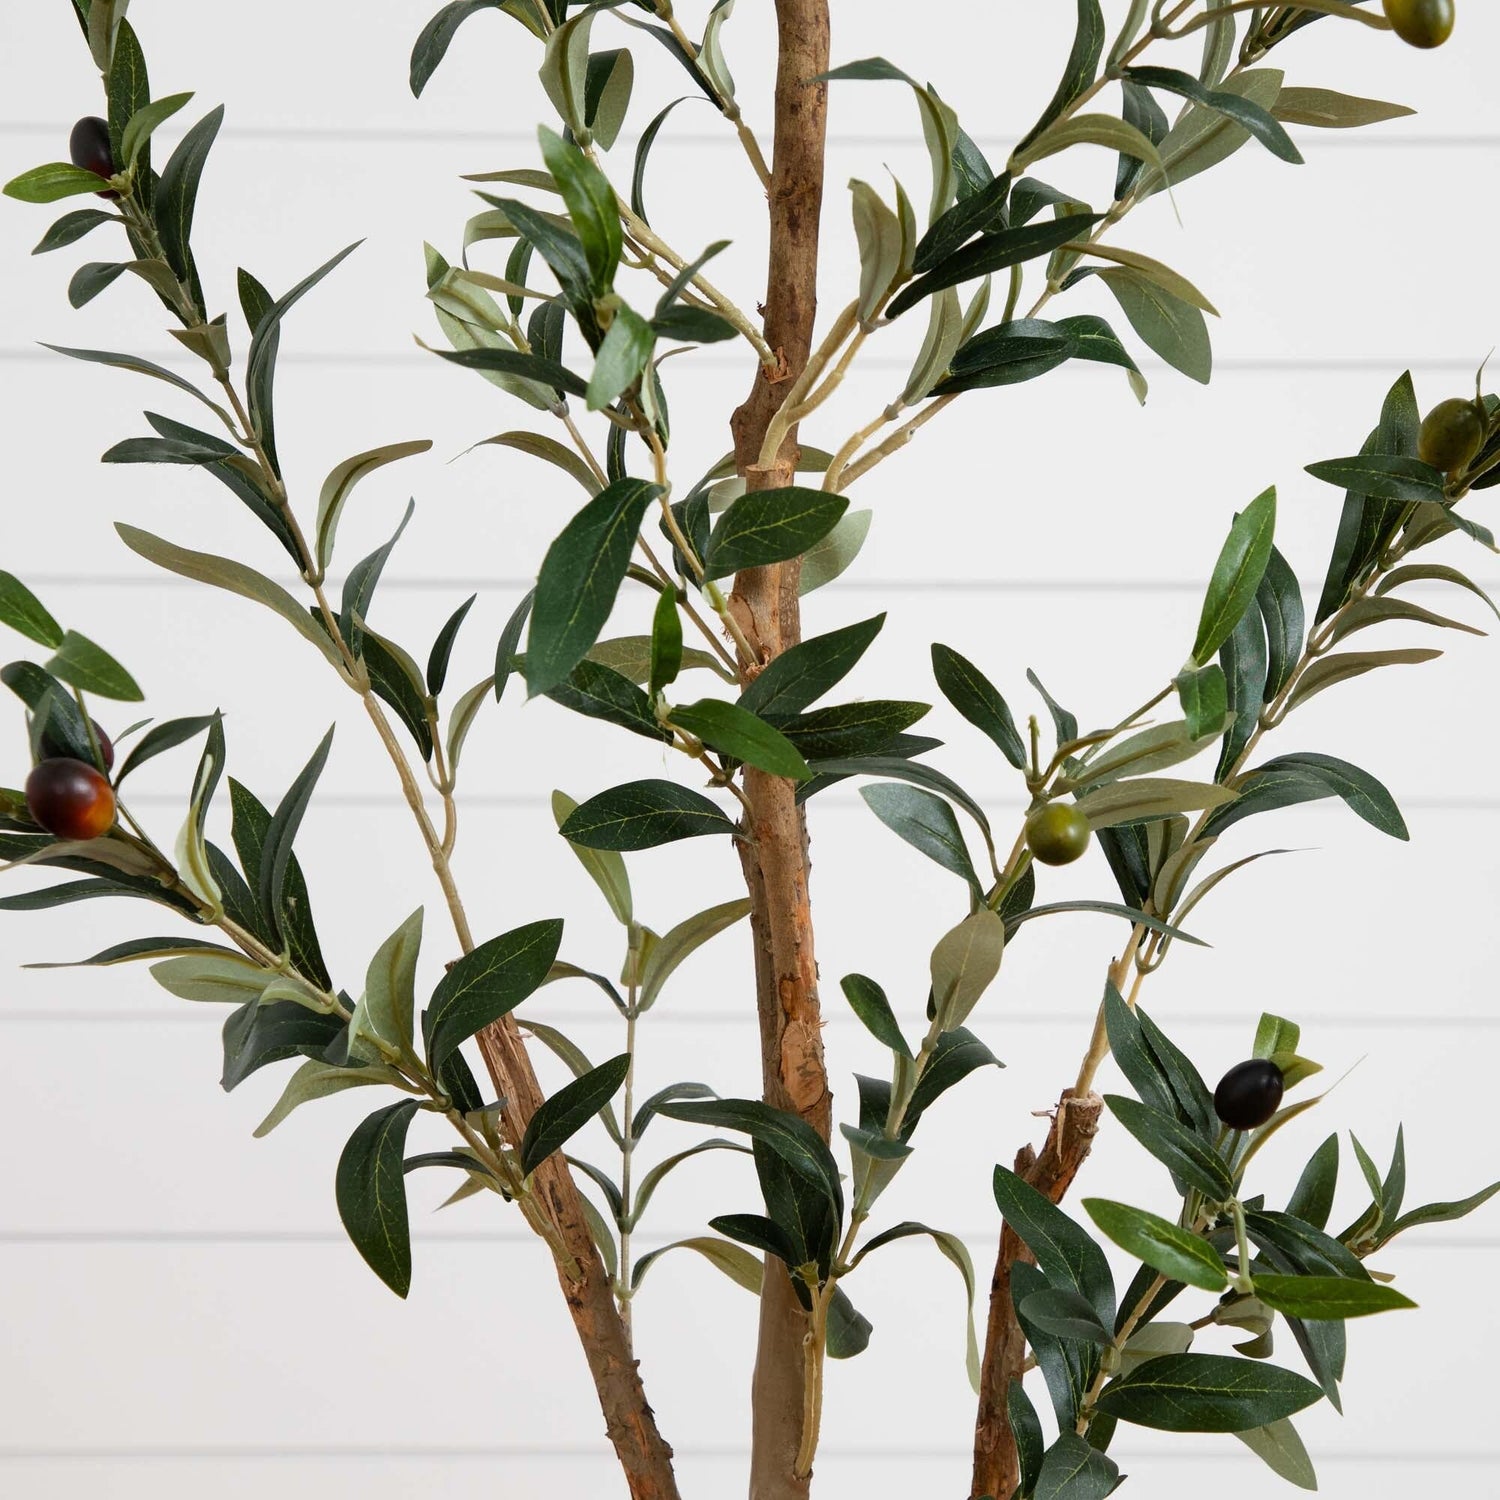 3.5’ Artificial Olive Tree